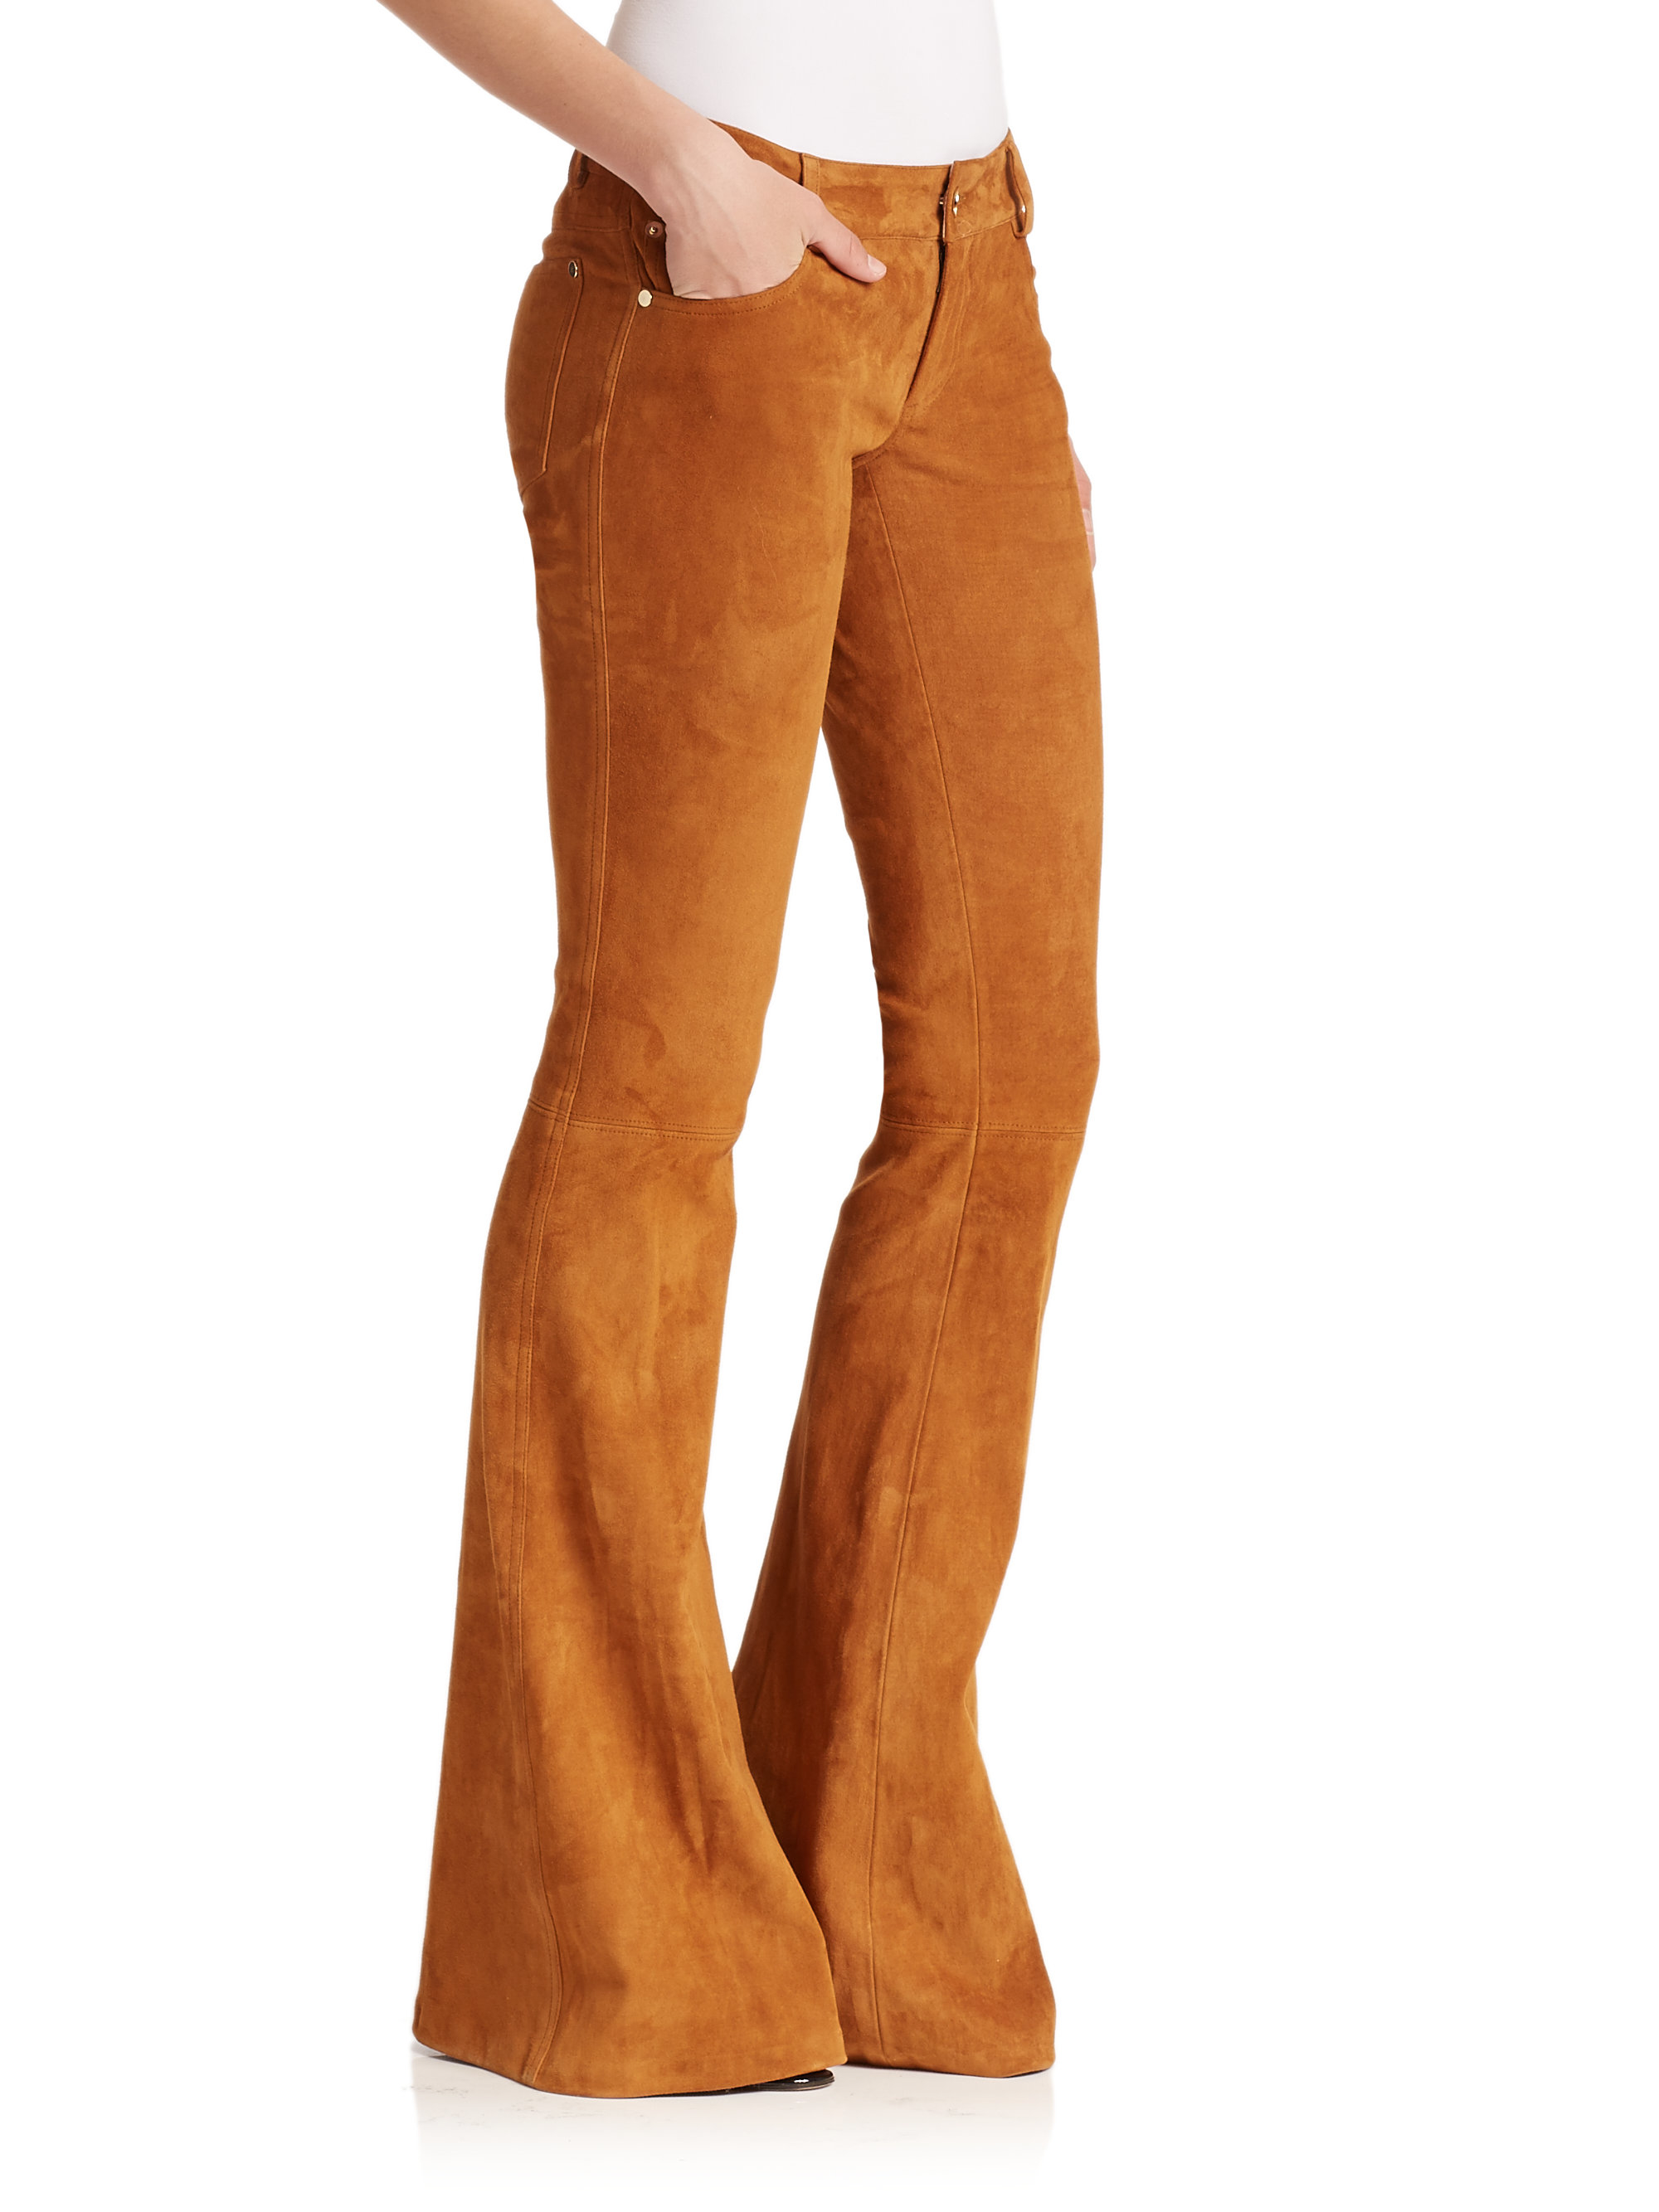 Alice + Olivia Suede Bell-bottom Pants in Camel (Brown) - Lyst